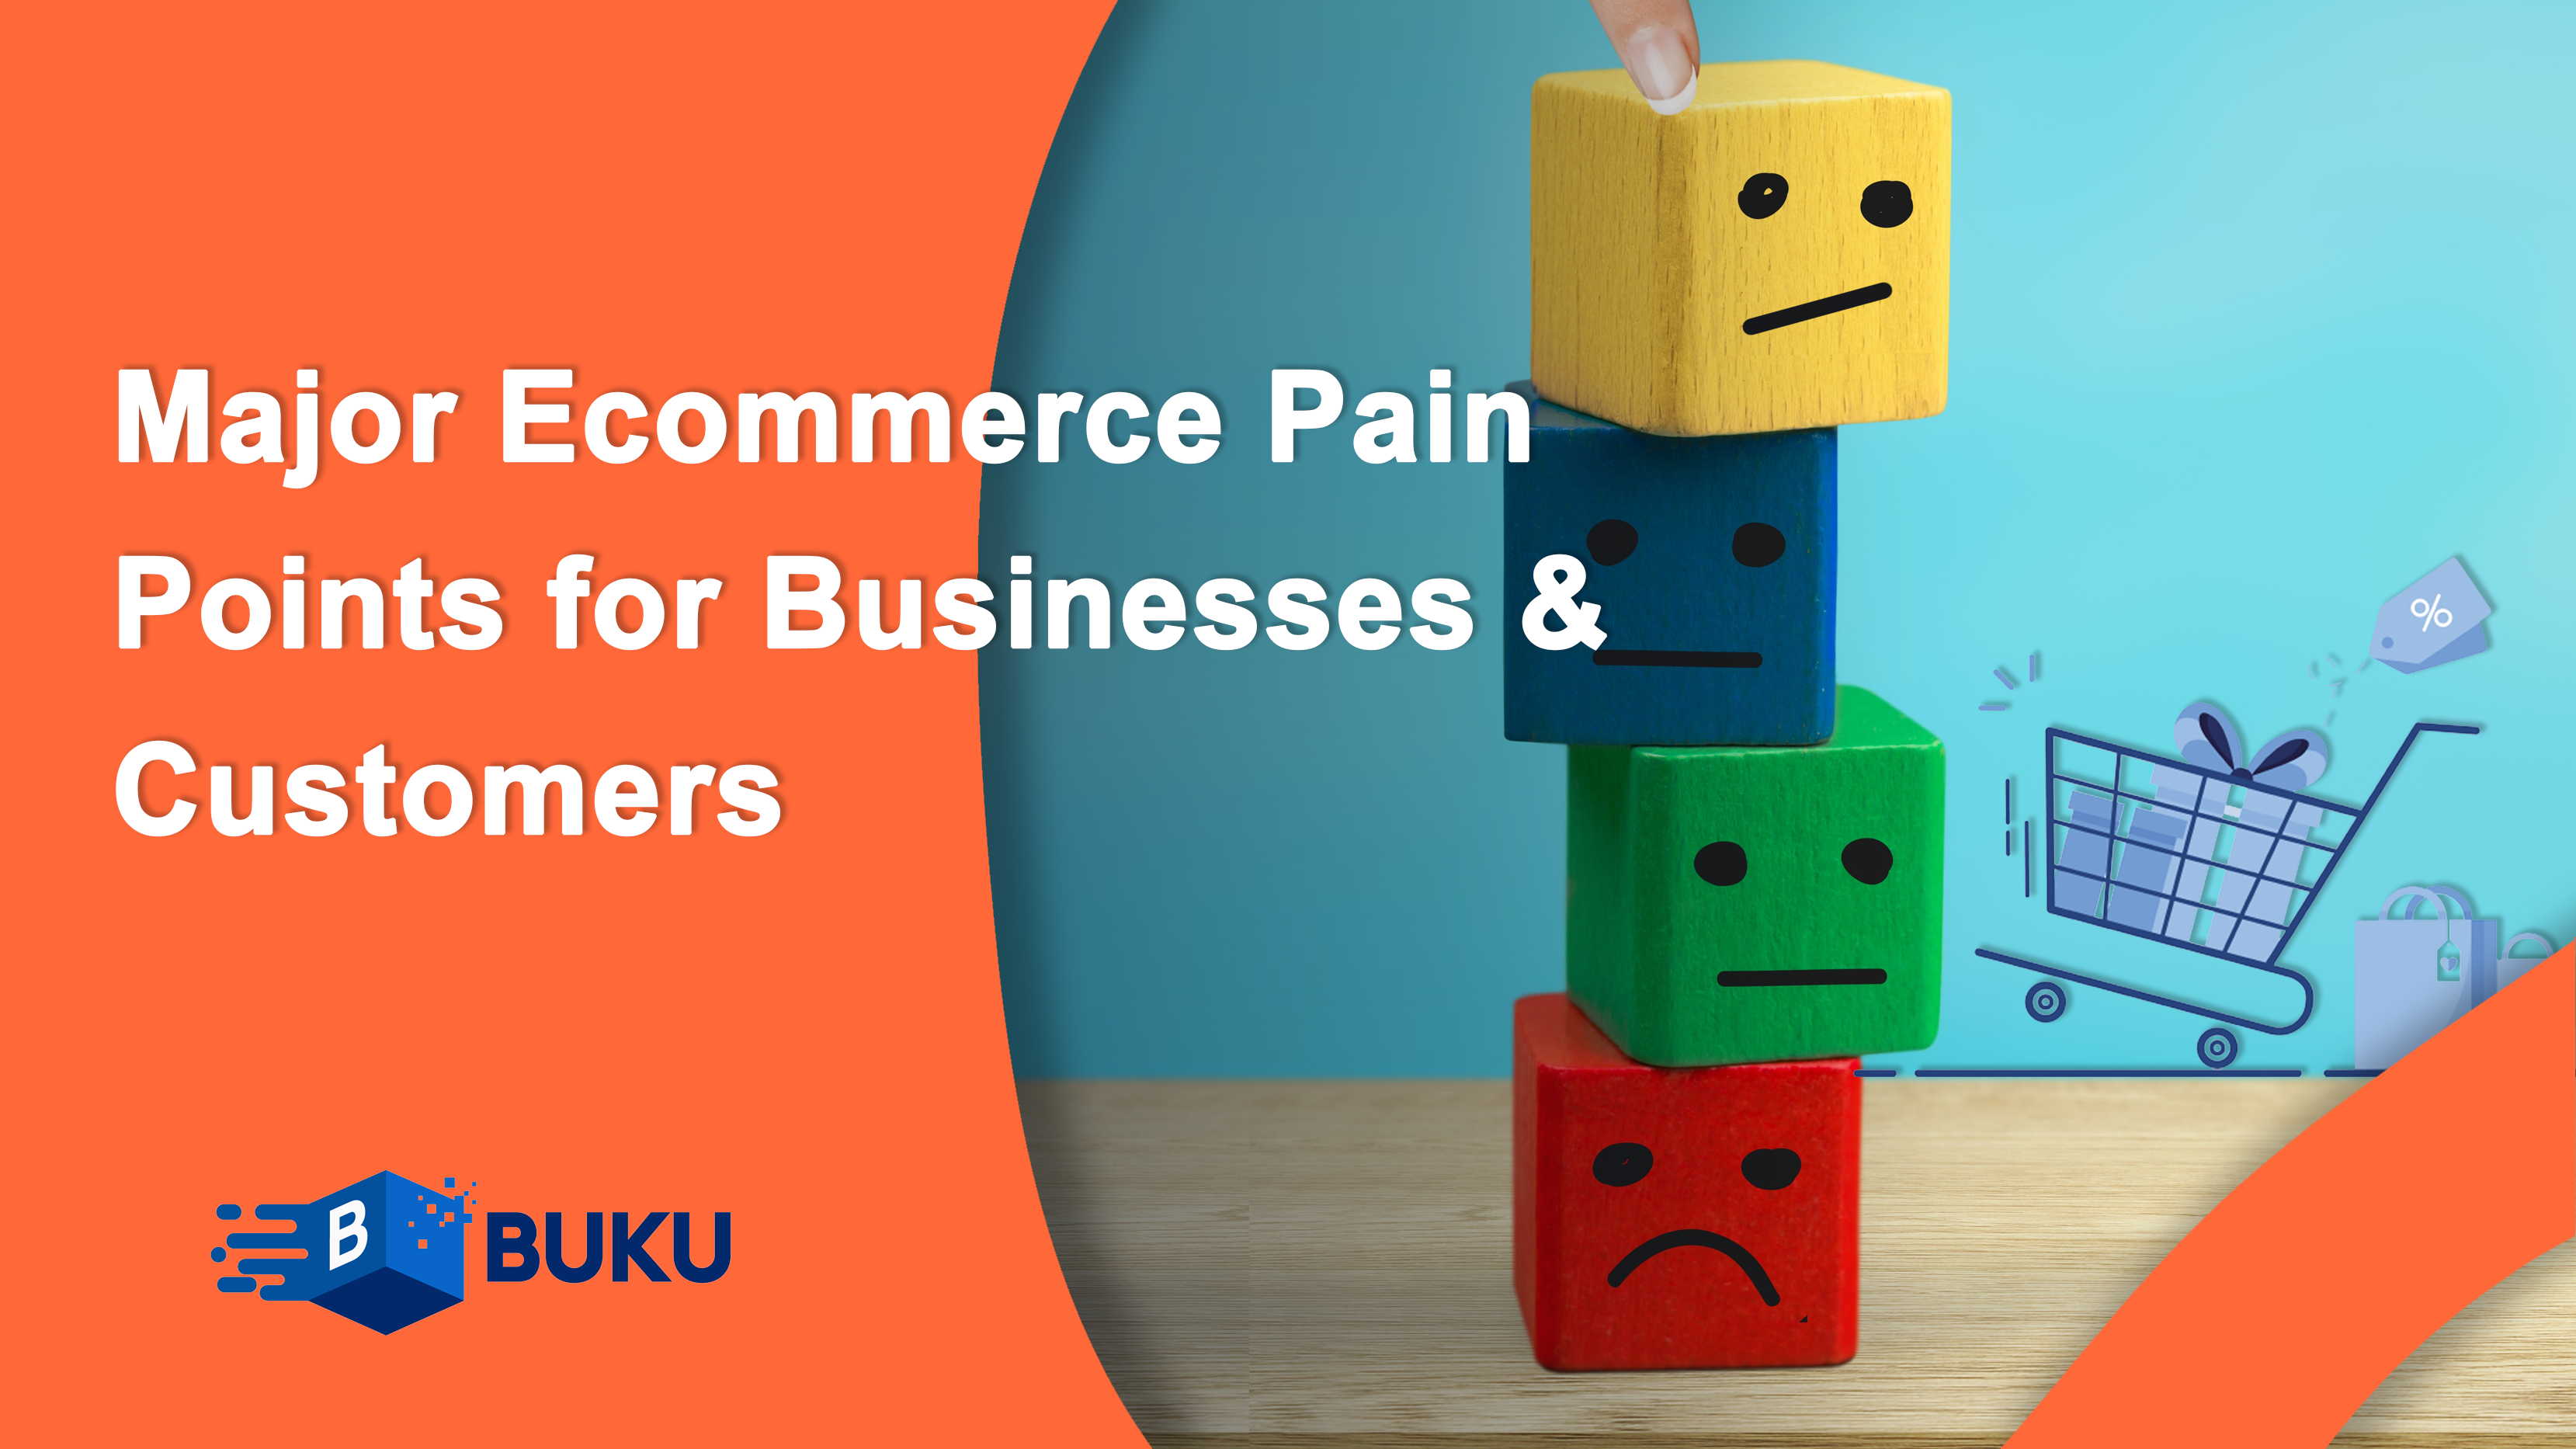 Major eCommerce pain points for online businesses and customers